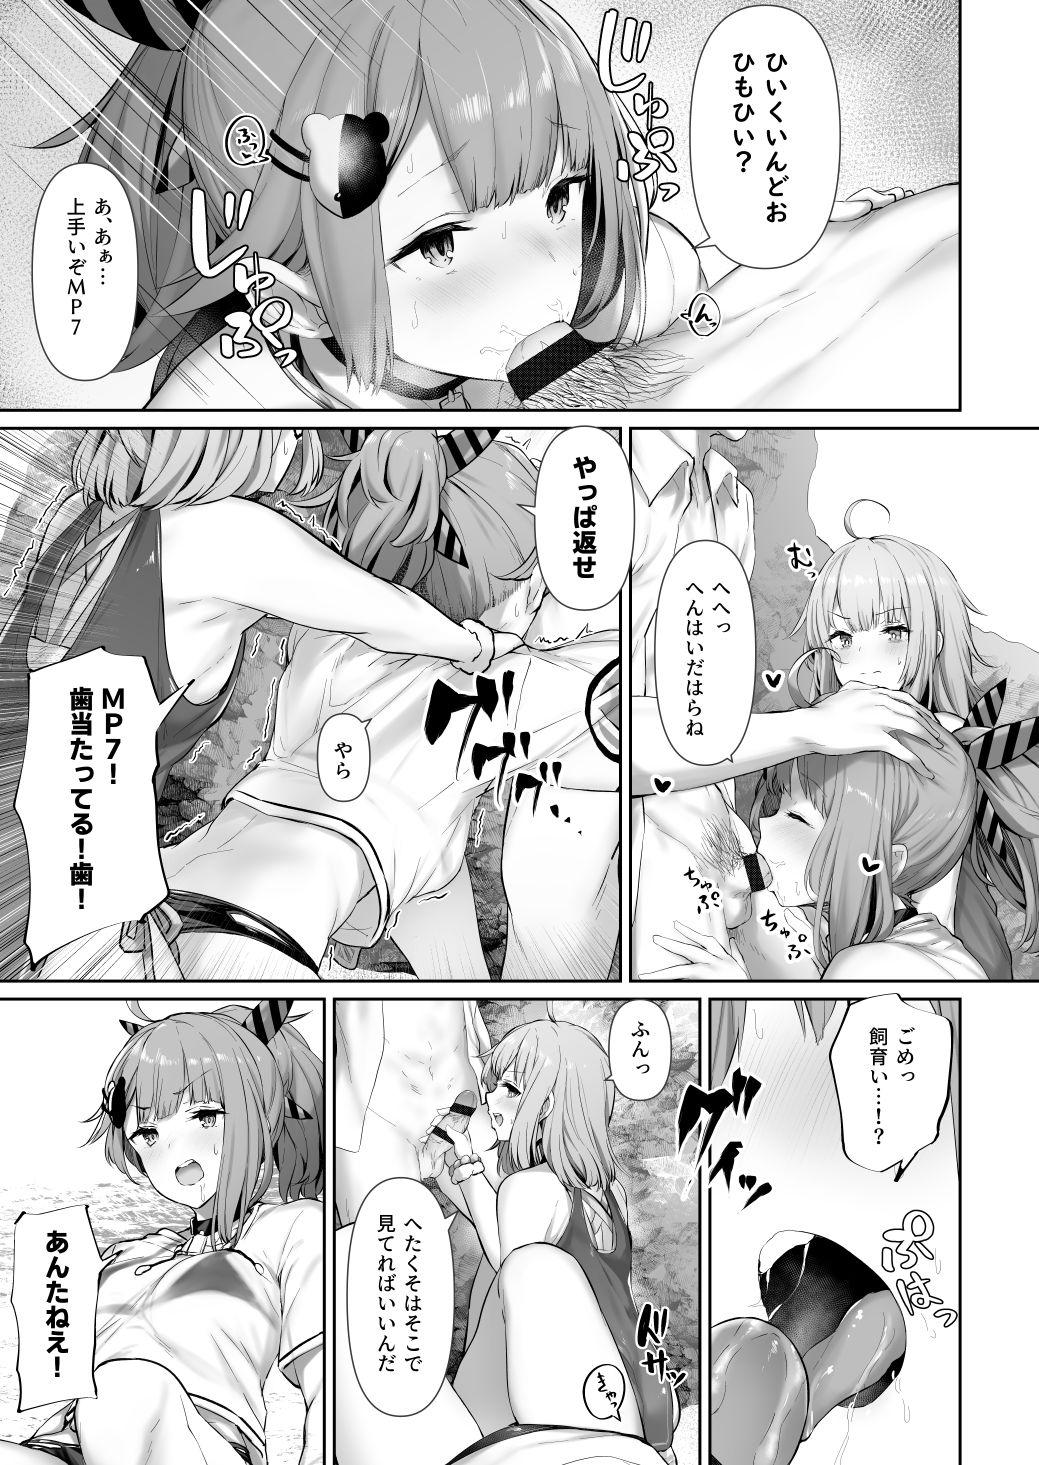 Eng Sub MP7 and AA-12 - Girls frontline Cartoon - Page 3